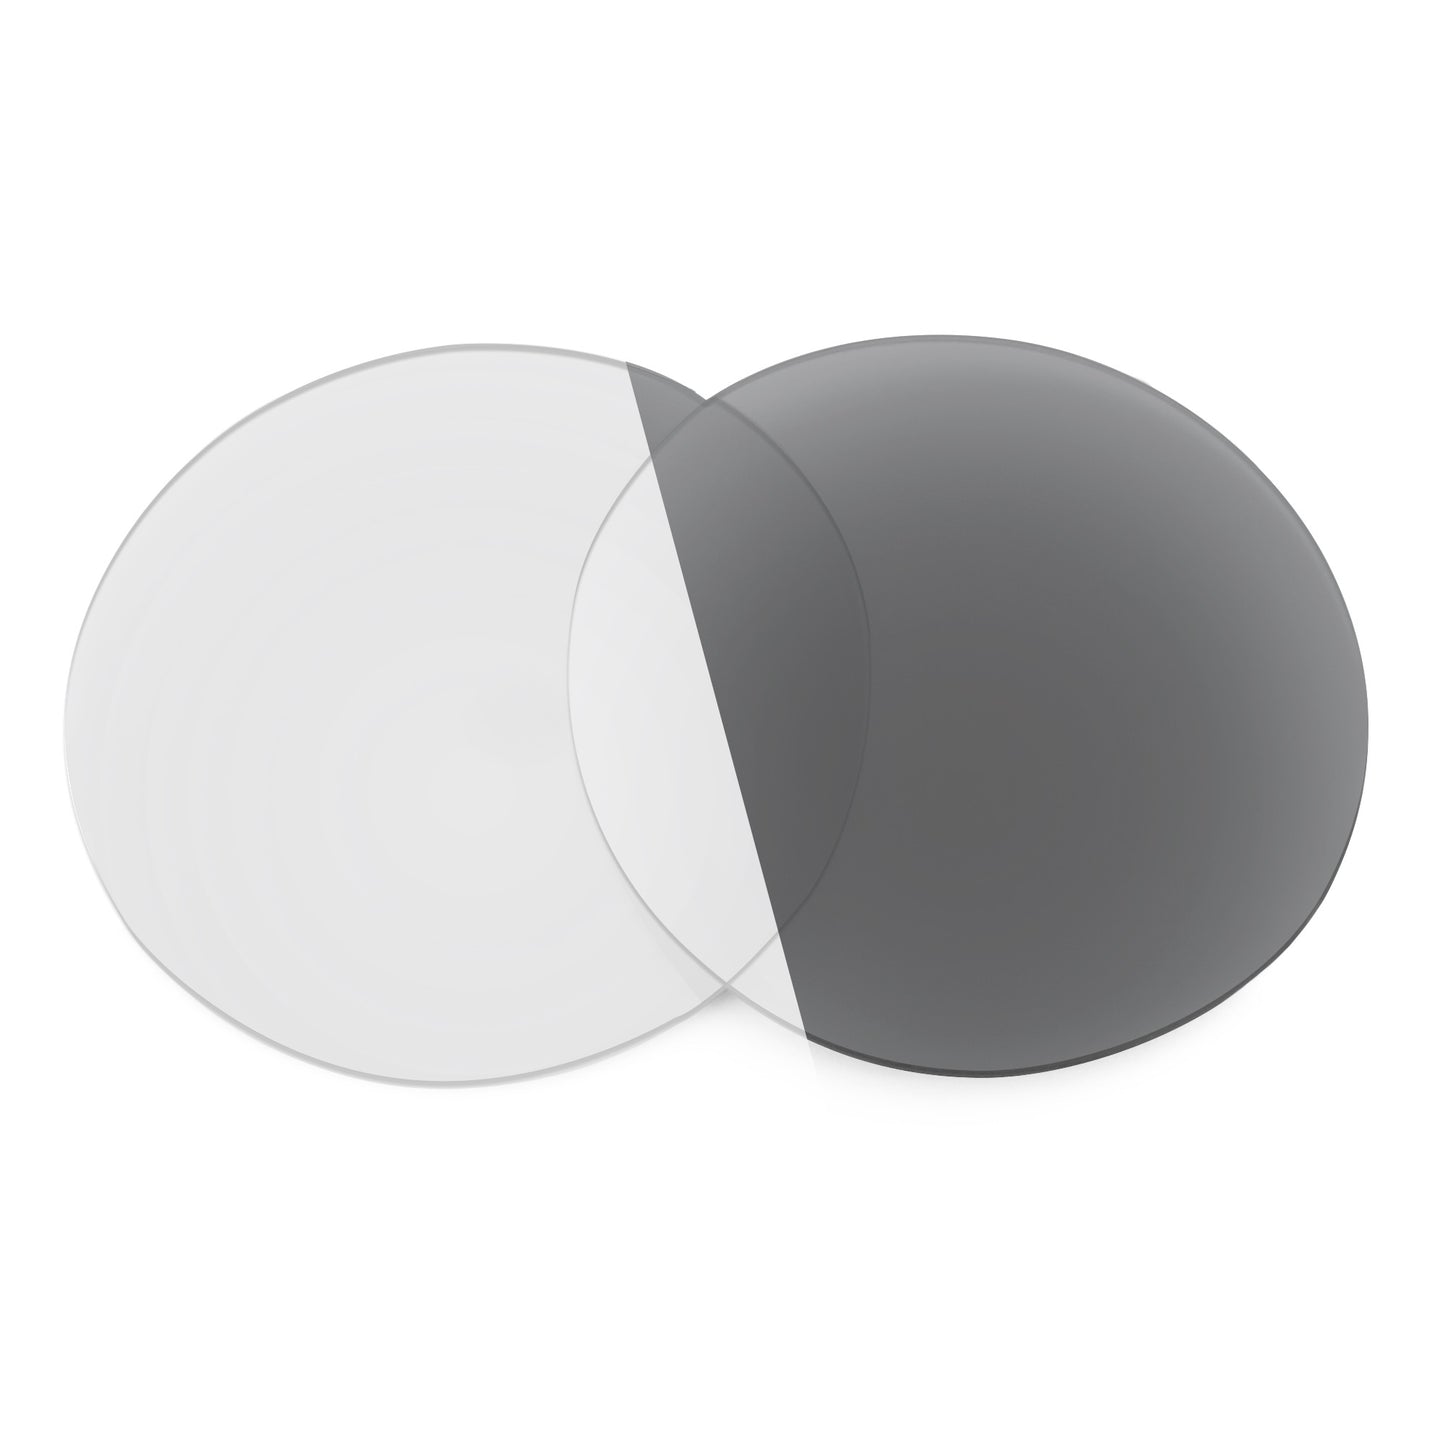 Revant replacement lenses for Ray-Ban RB4337 59mm Non-Polarized Adapt Gray Photochromic